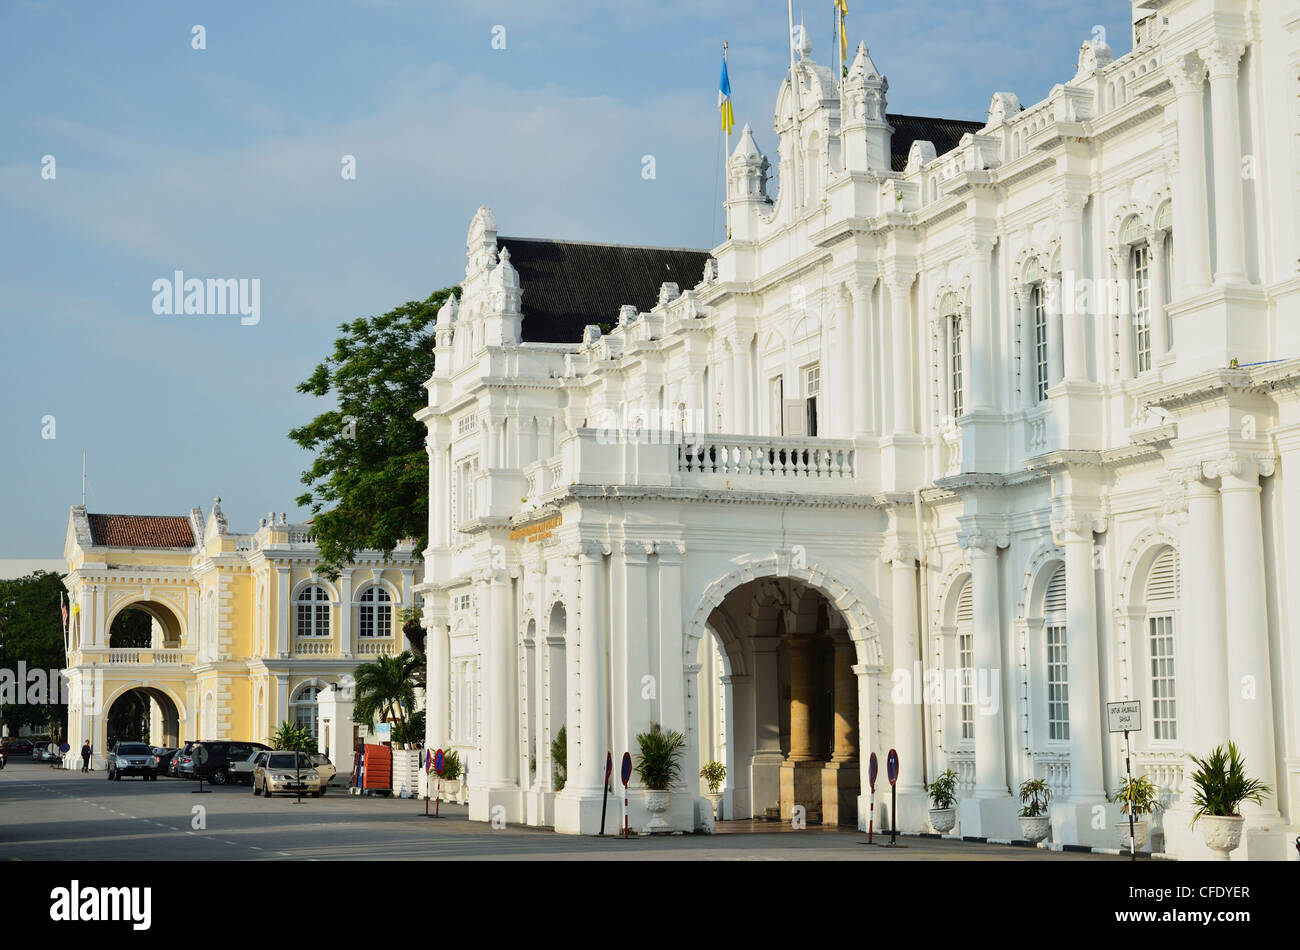 City Hall George Town Unesco World Heritage Site Penang Malaysia Southeast Asia Asia Stock Photo Alamy